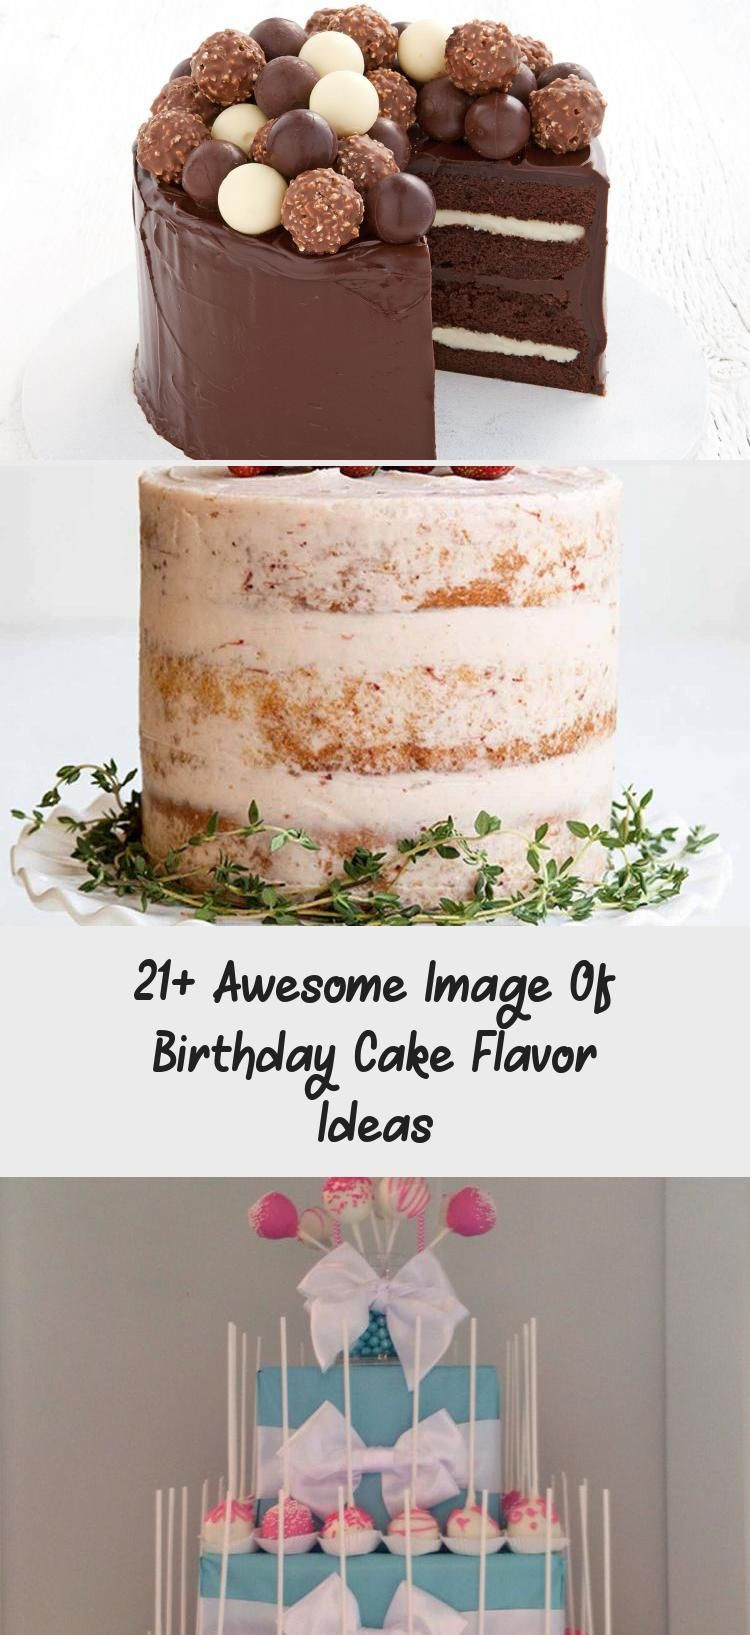 Birthday Cake Flavor Ideas
 21 Awesome Image of Birthday Cake Flavor Ideas Birthday